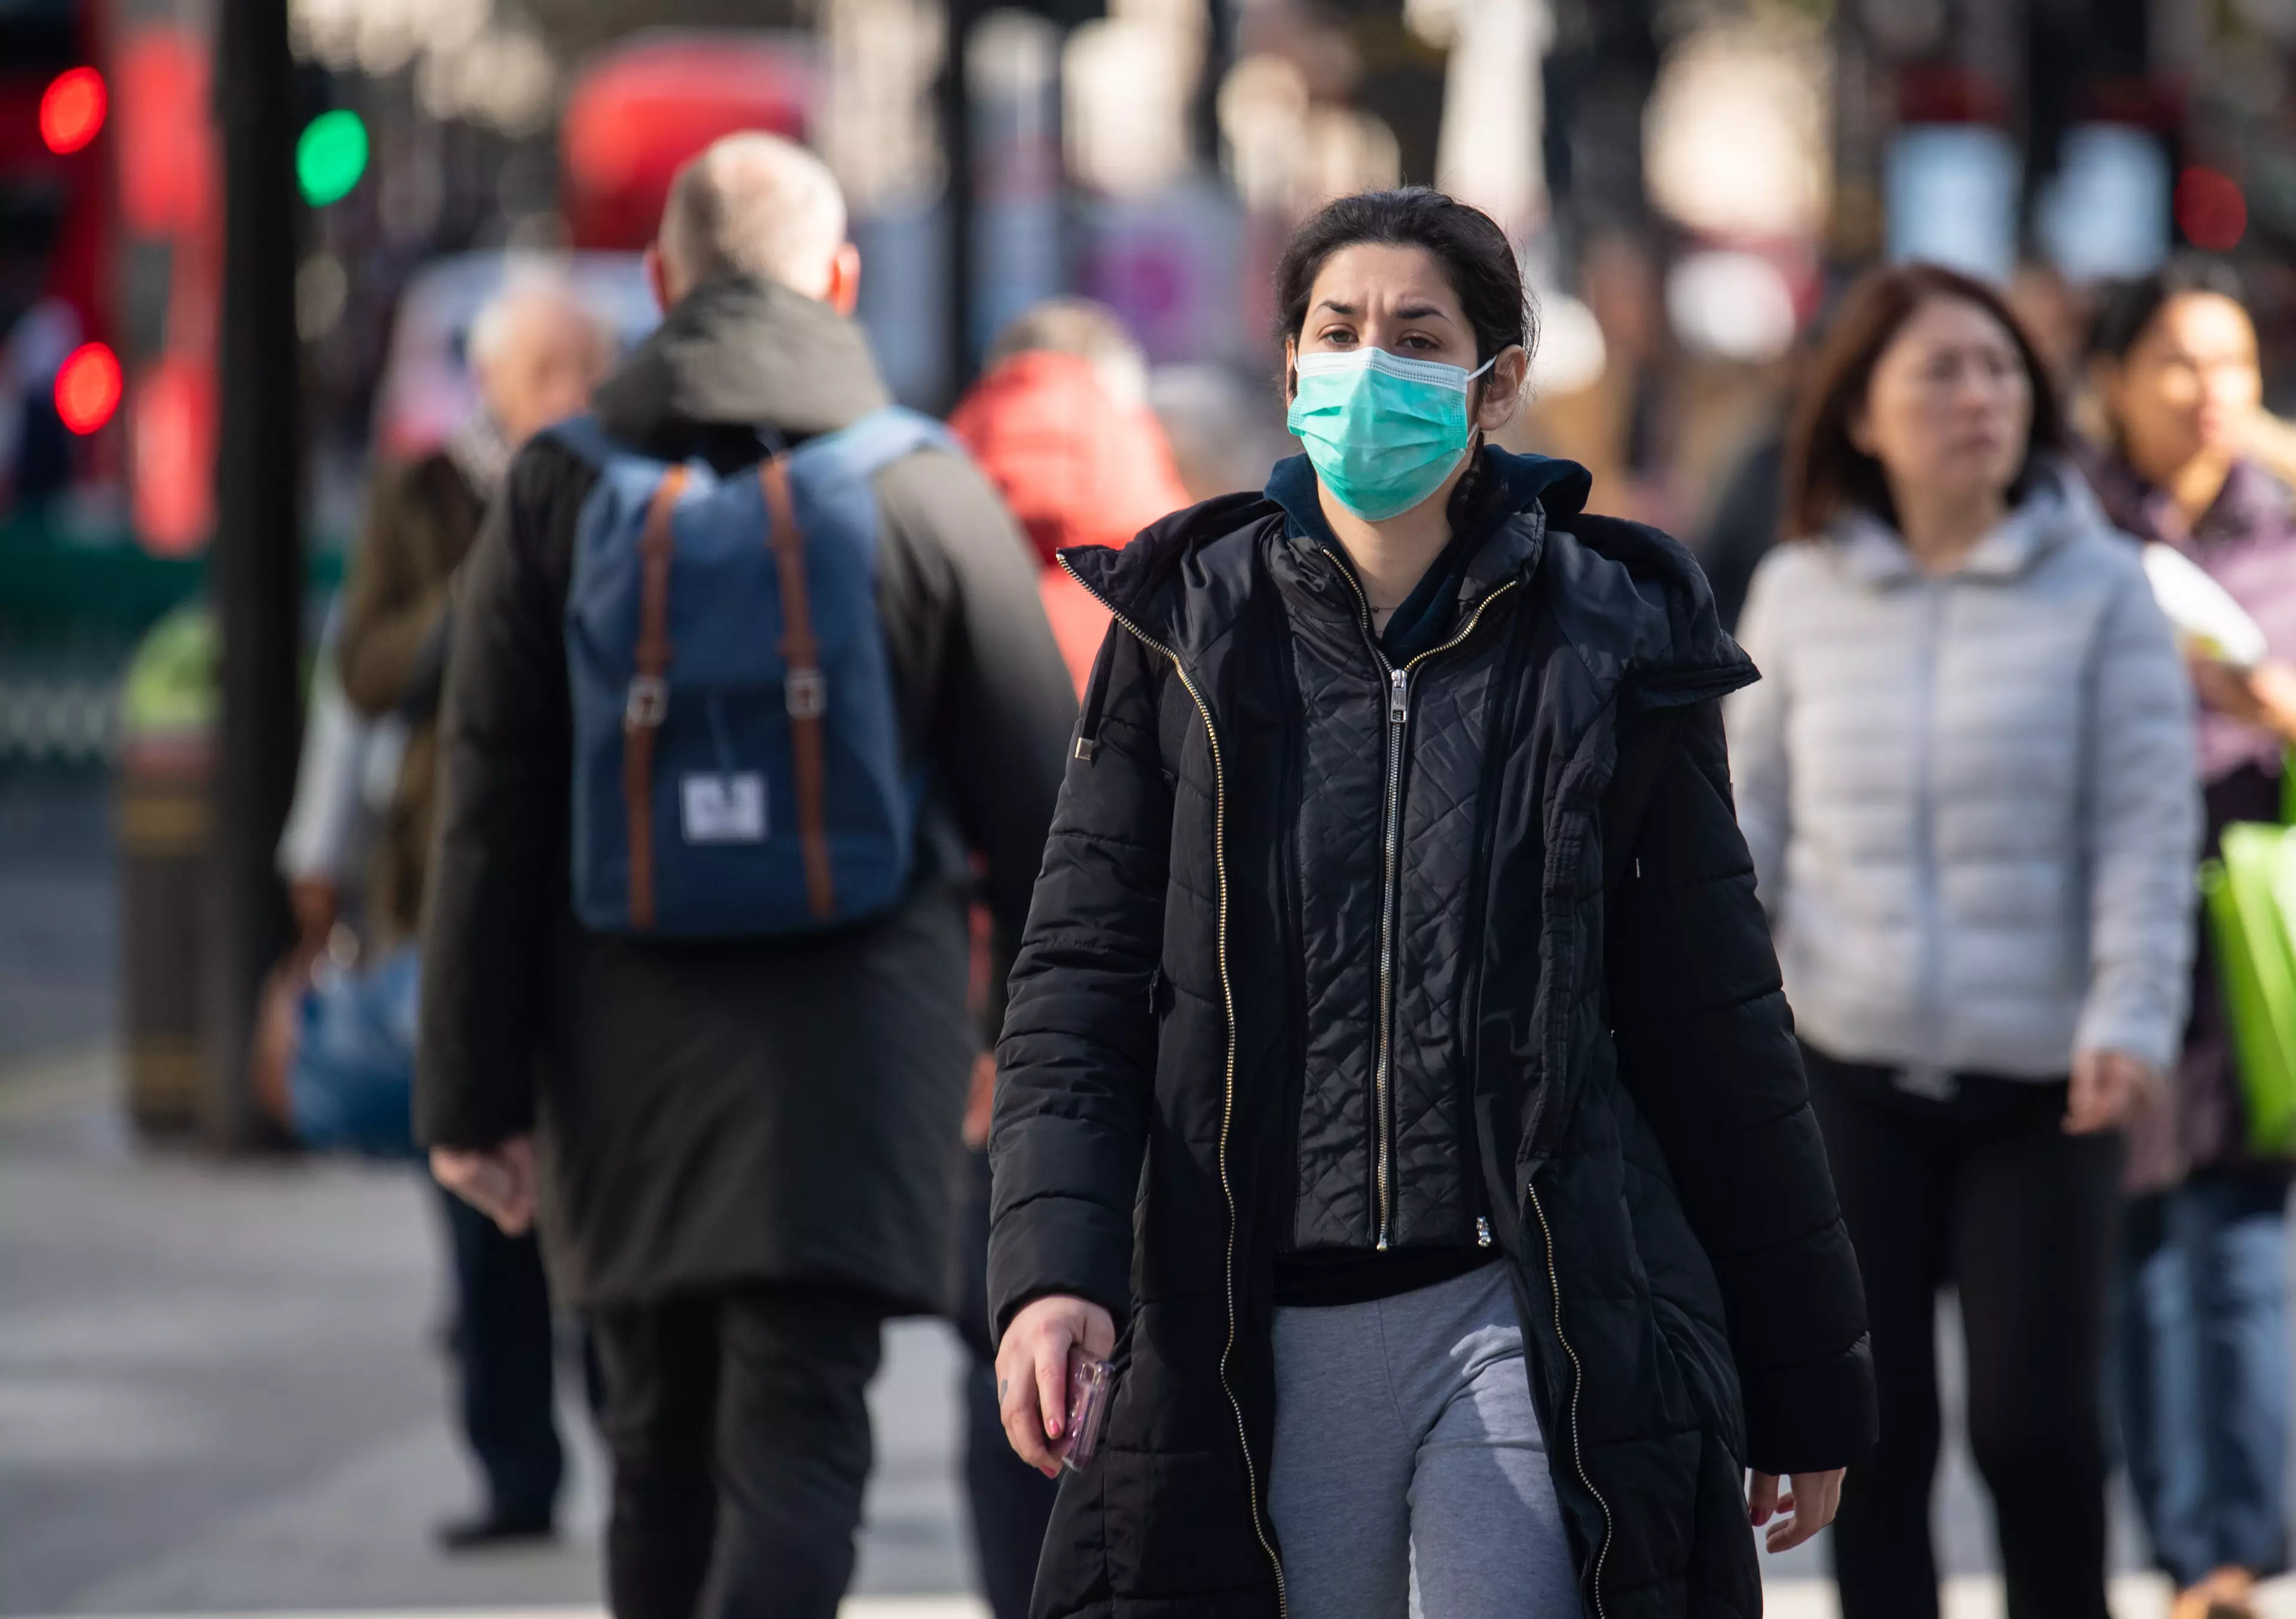 People in London are trying to protect themselves with facial masks.